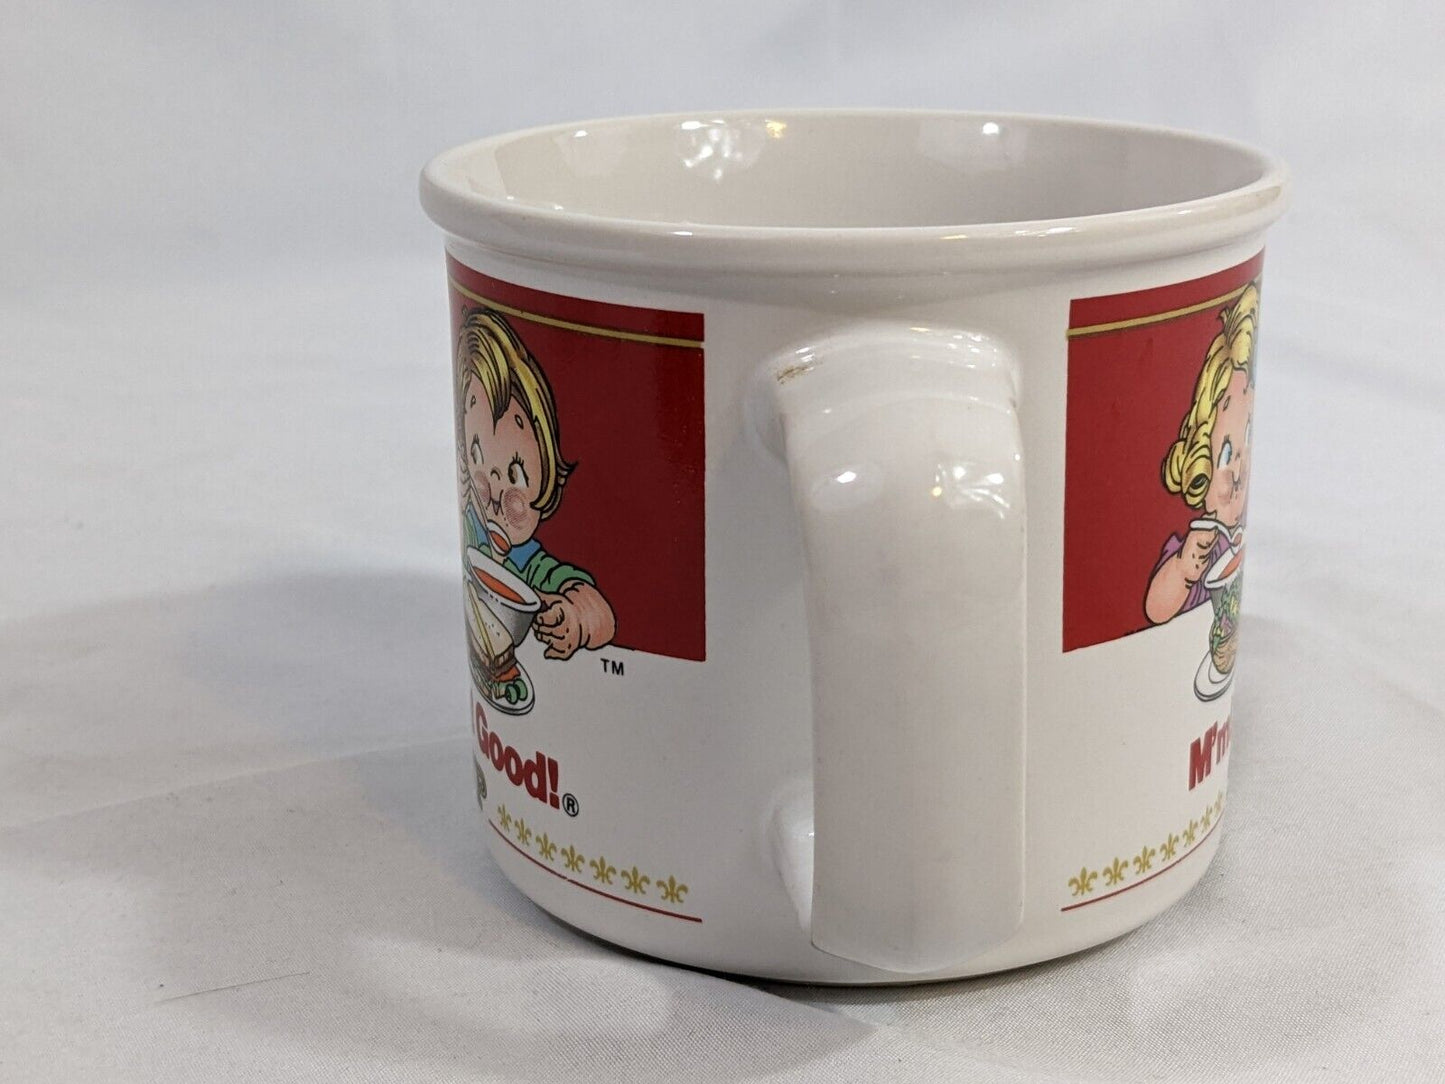 Campbell's Soup Ceramic Mug 1991 Microwavable 14 fl oz by Westwood